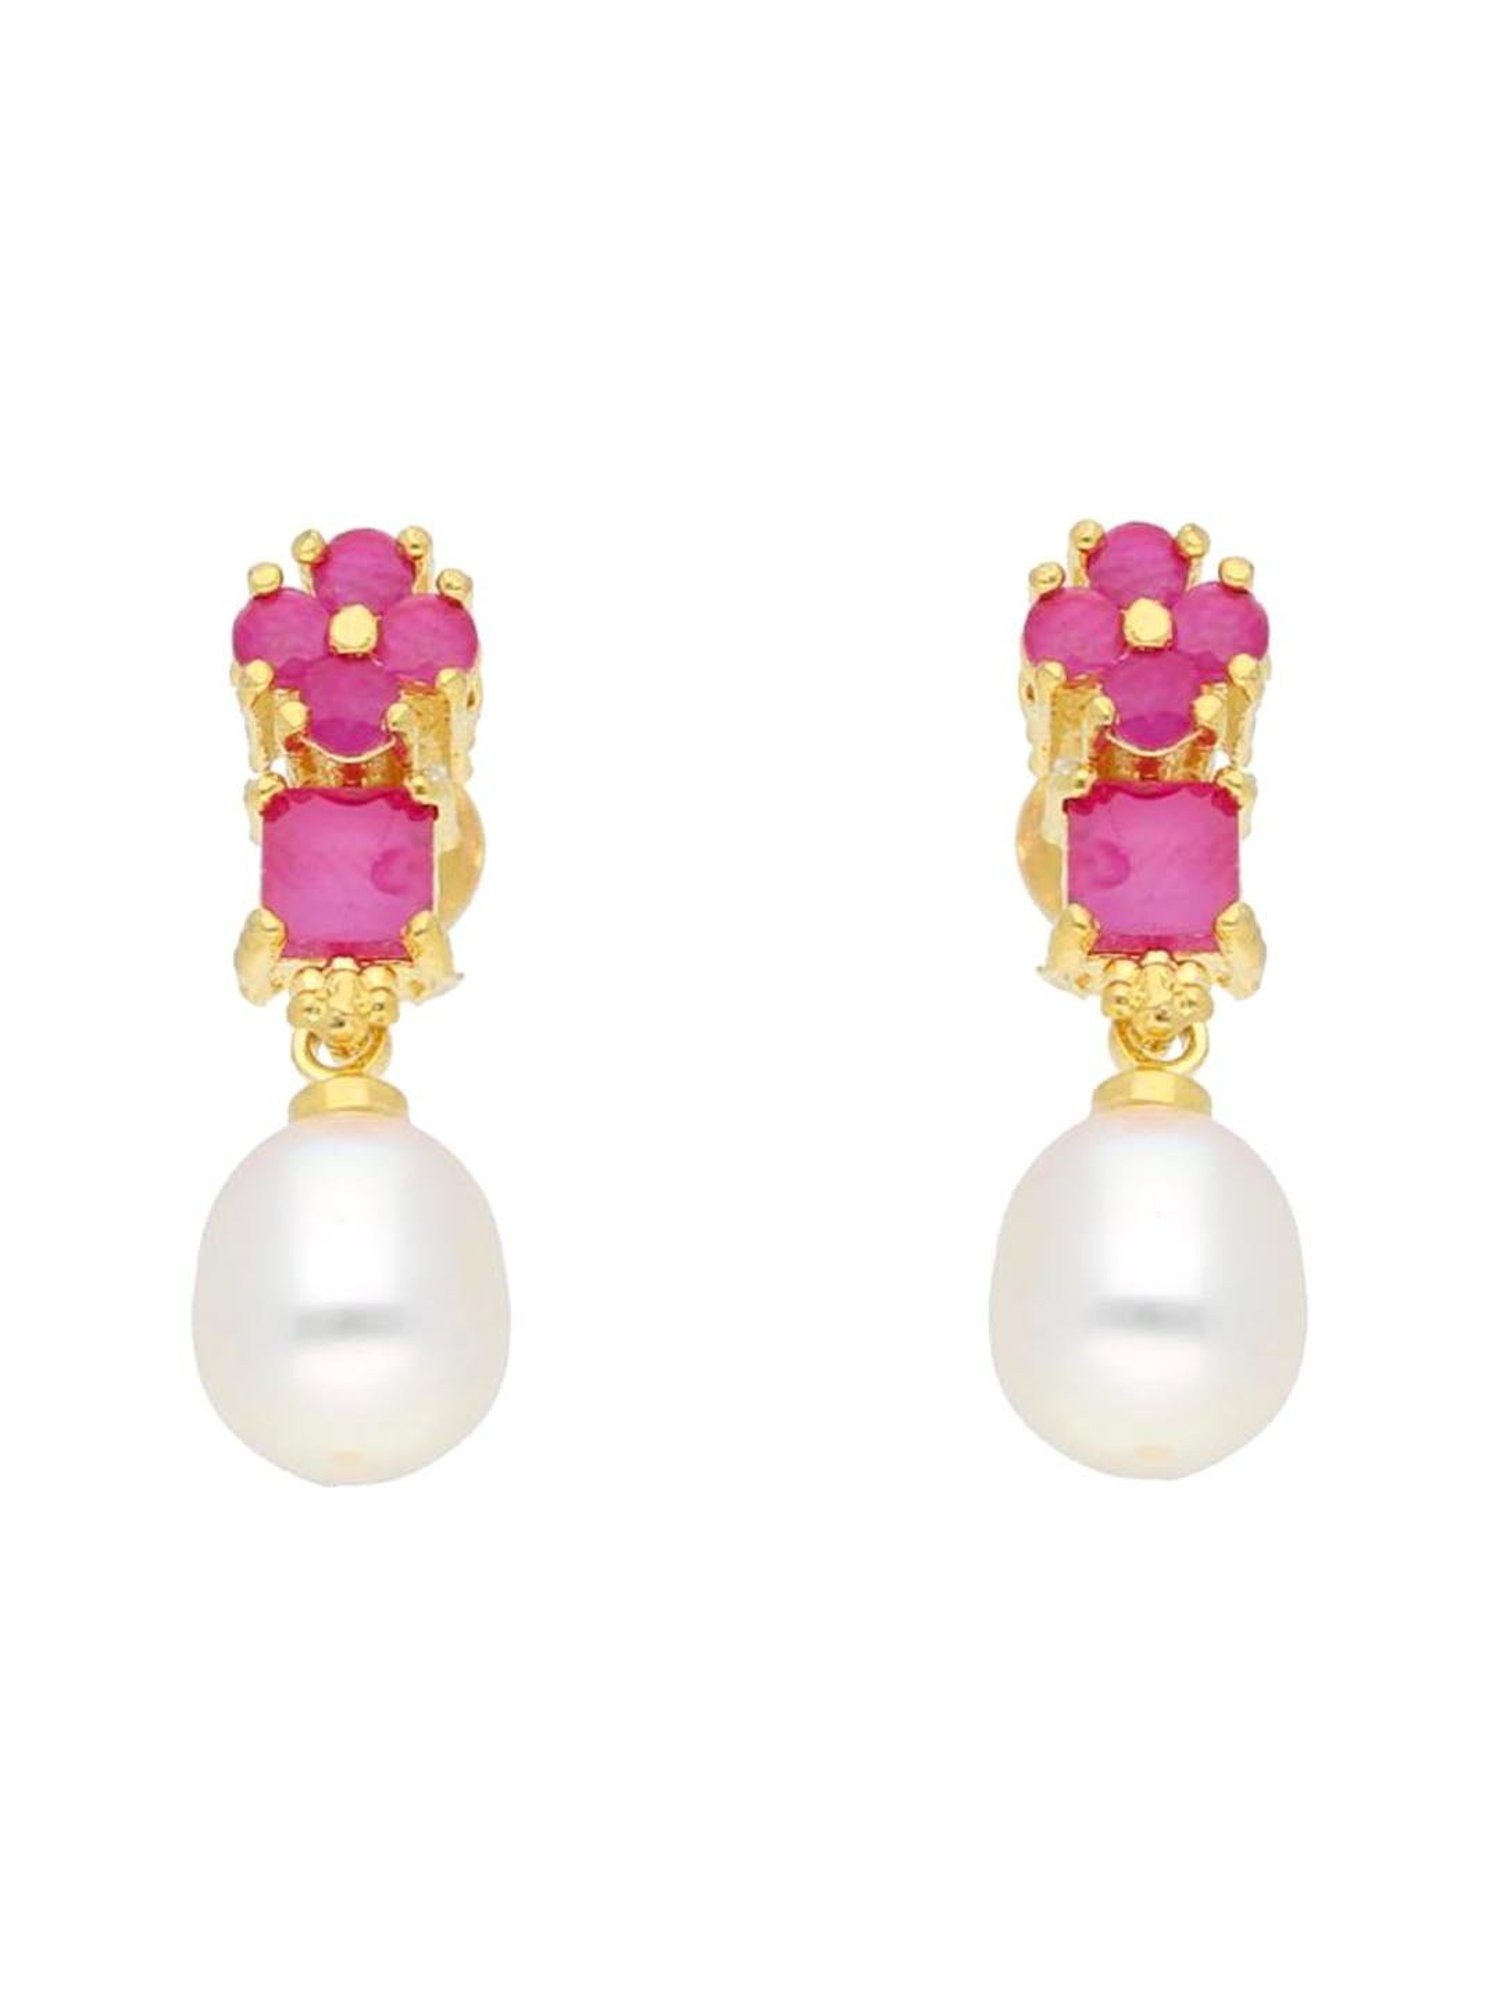 Sri Jagdamba Pearls Pearls Wishi Pearl Pink Earrings: Buy Sri Jagdamba  Pearls Pearls Wishi Pearl Pink Earrings Online at Best Price in India |  Nykaa